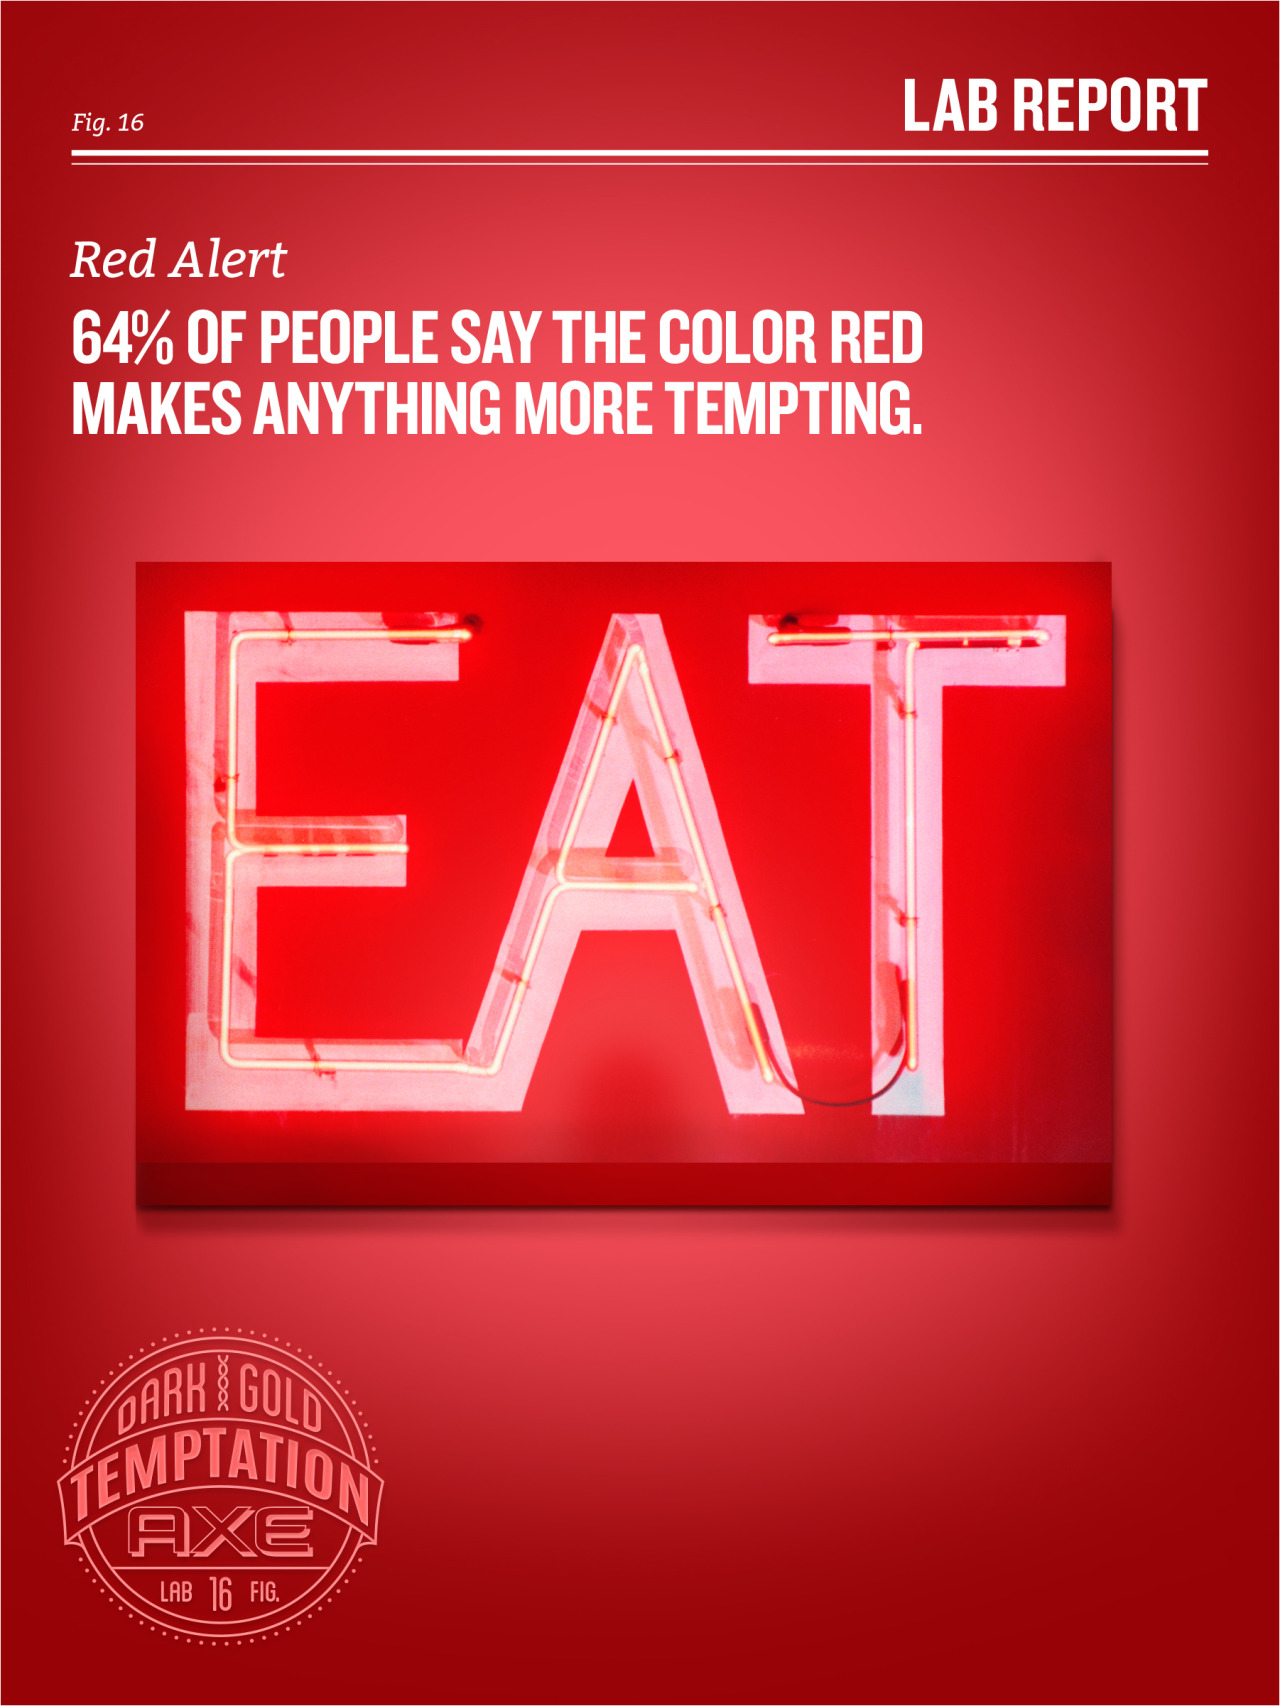 axetemptation:  64% of people say the color red makes anything more tempting. Notes: